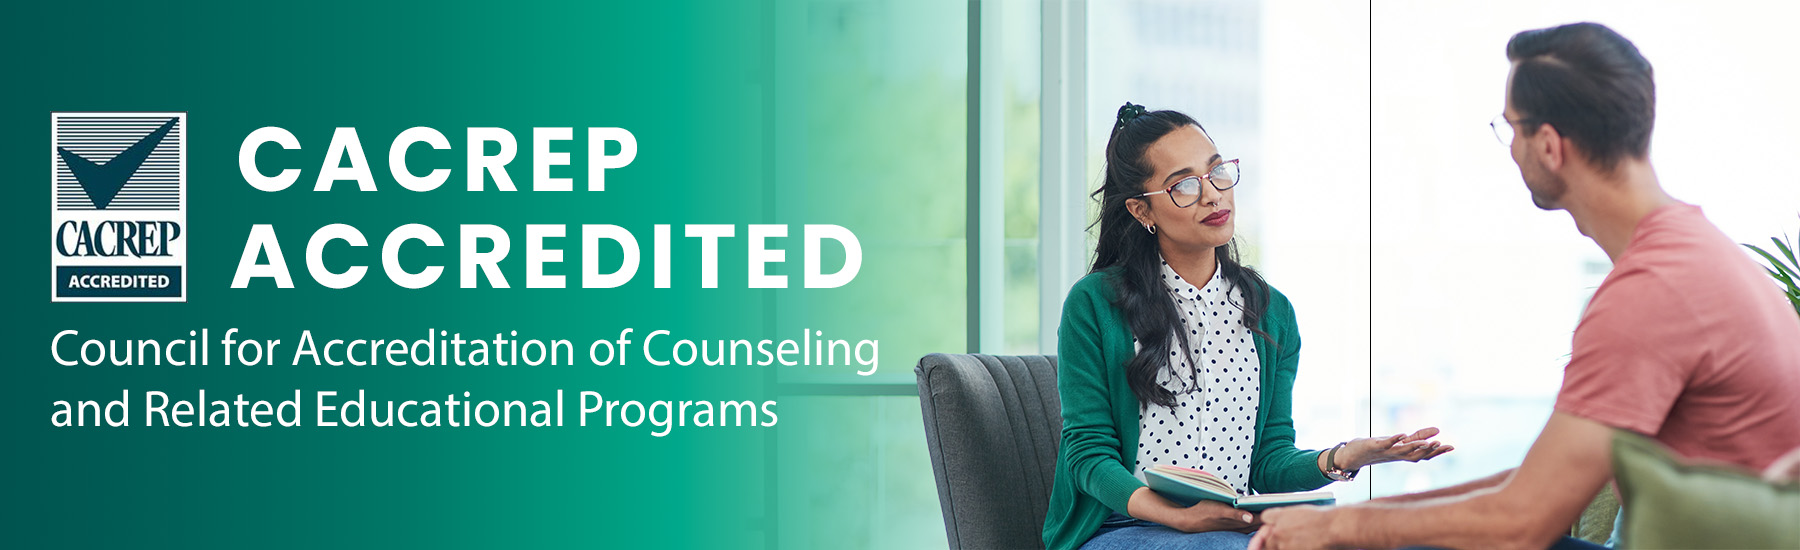 M.S. Clinical Mental Health Counseling is accredited by CACREP.